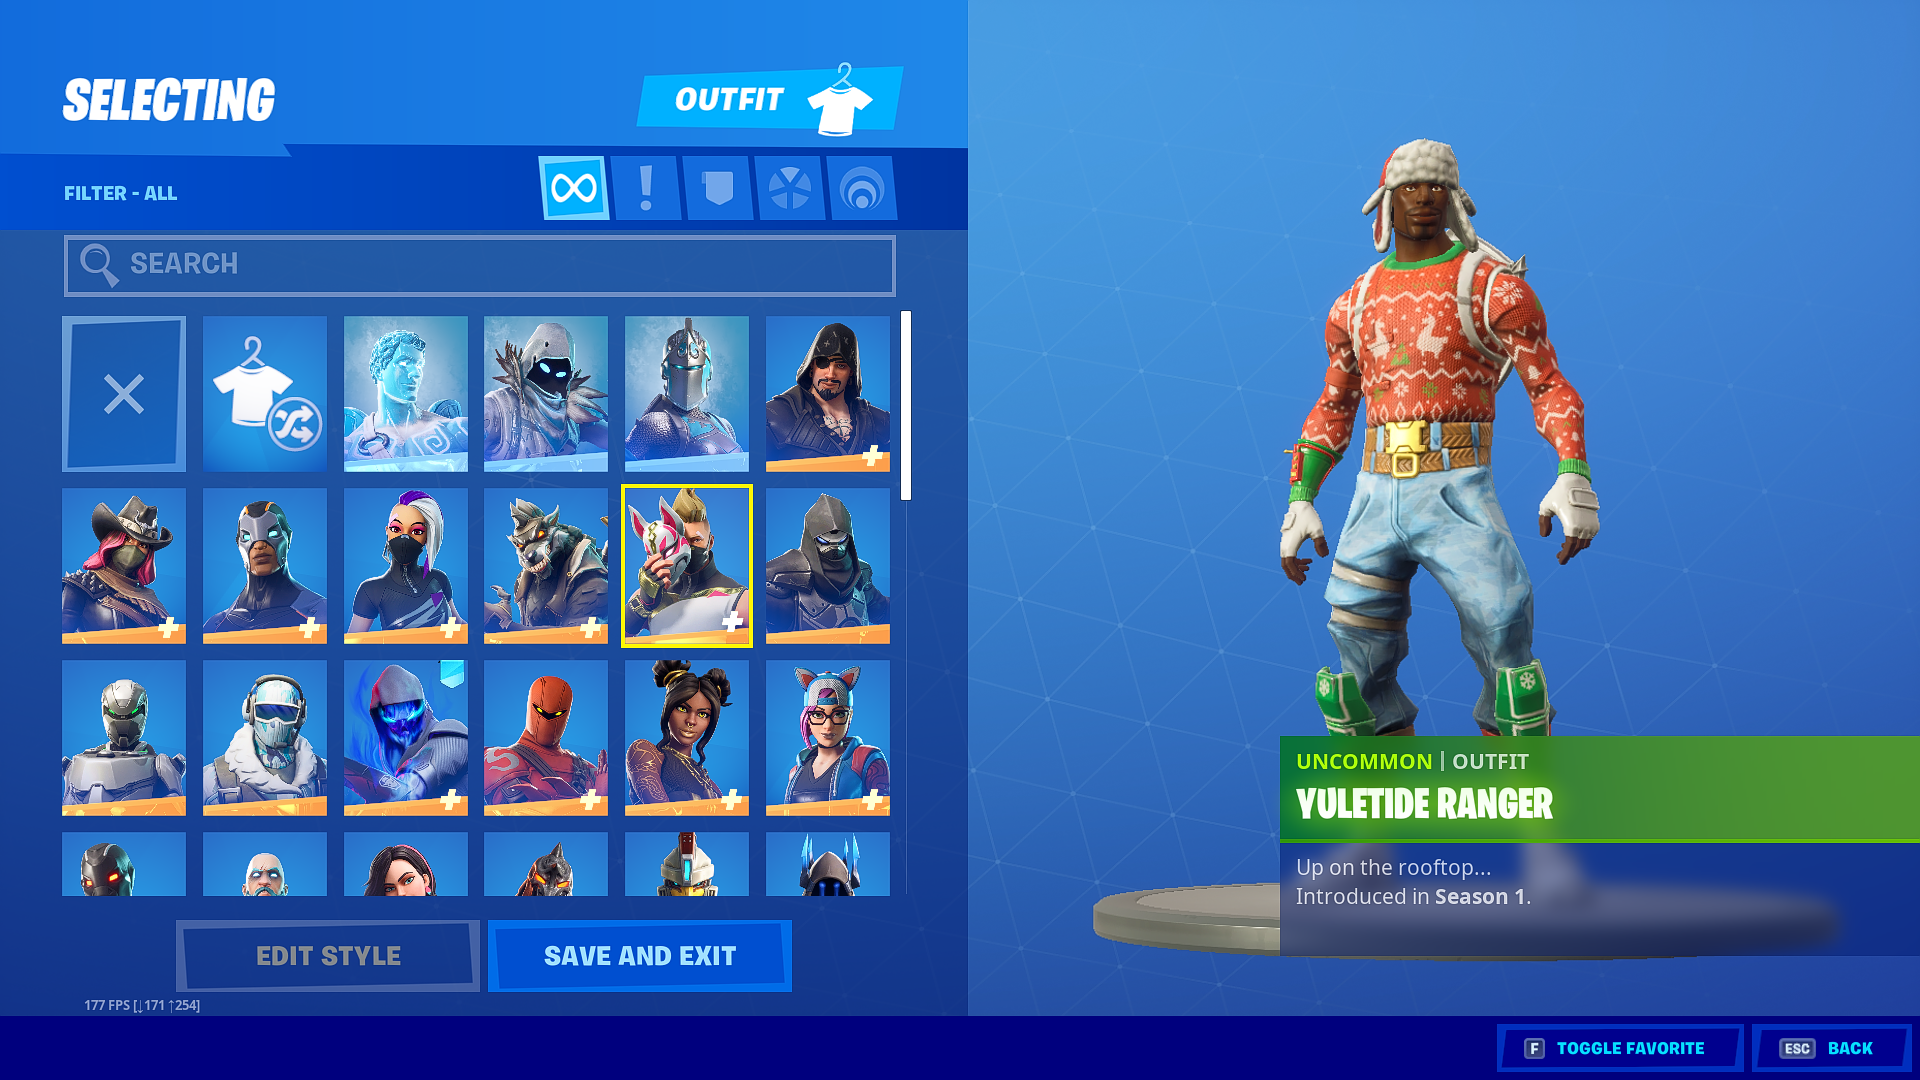 Discord Buy Sell Fortnite Accounts Selling Fortnite Account 68 Skins 25 Add Discord Lil Cumquief 2457 Epicnpc Marketplace